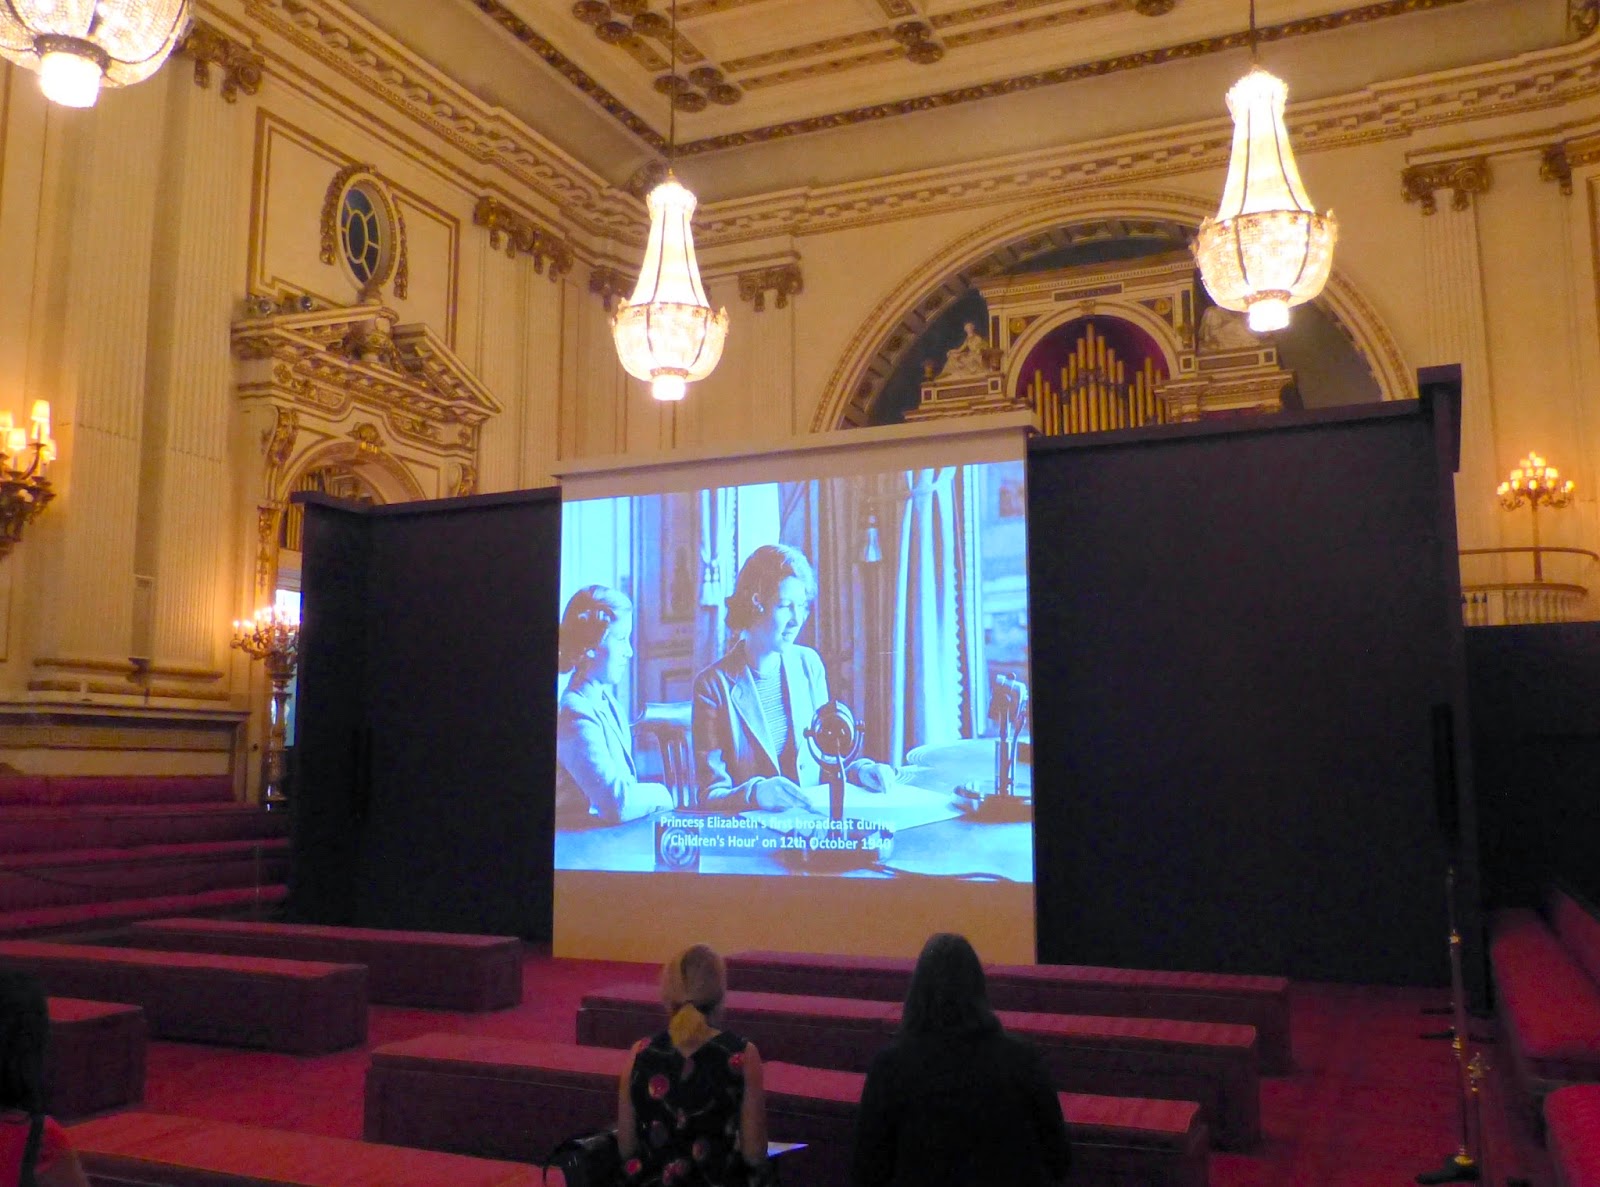 Footage about the Queen as a child being shown in The Ballroom